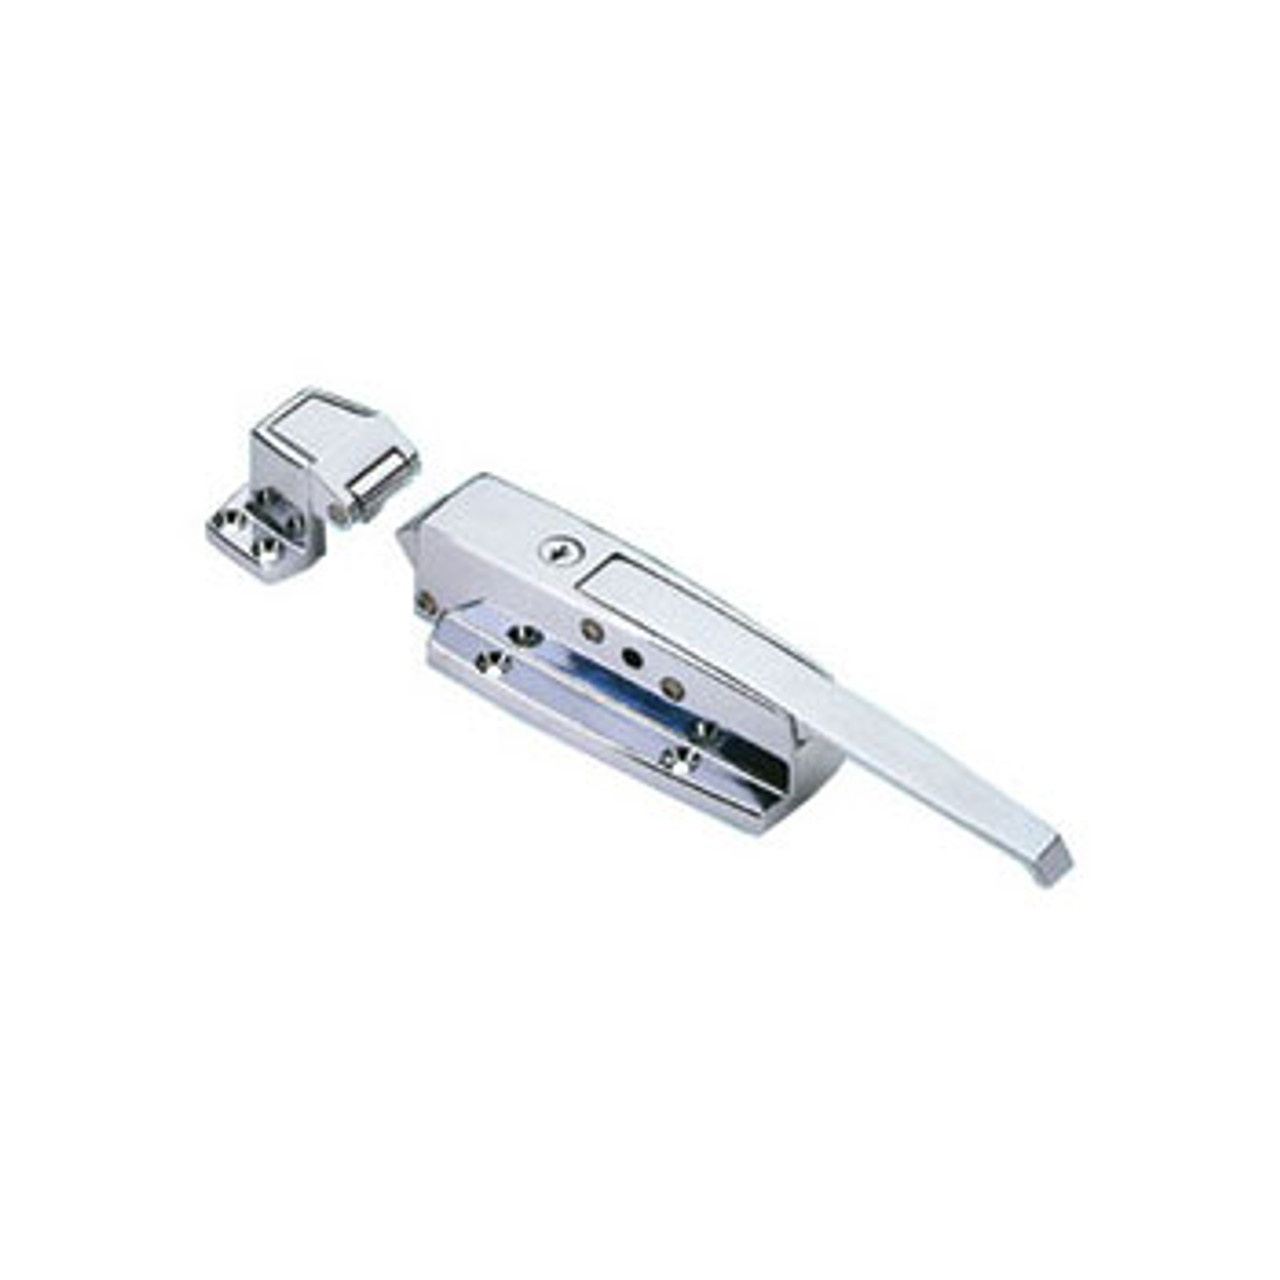 Generic Cooler/Freezer Latch and Strike, 3/4 to 1 5/8 Offset with Lock